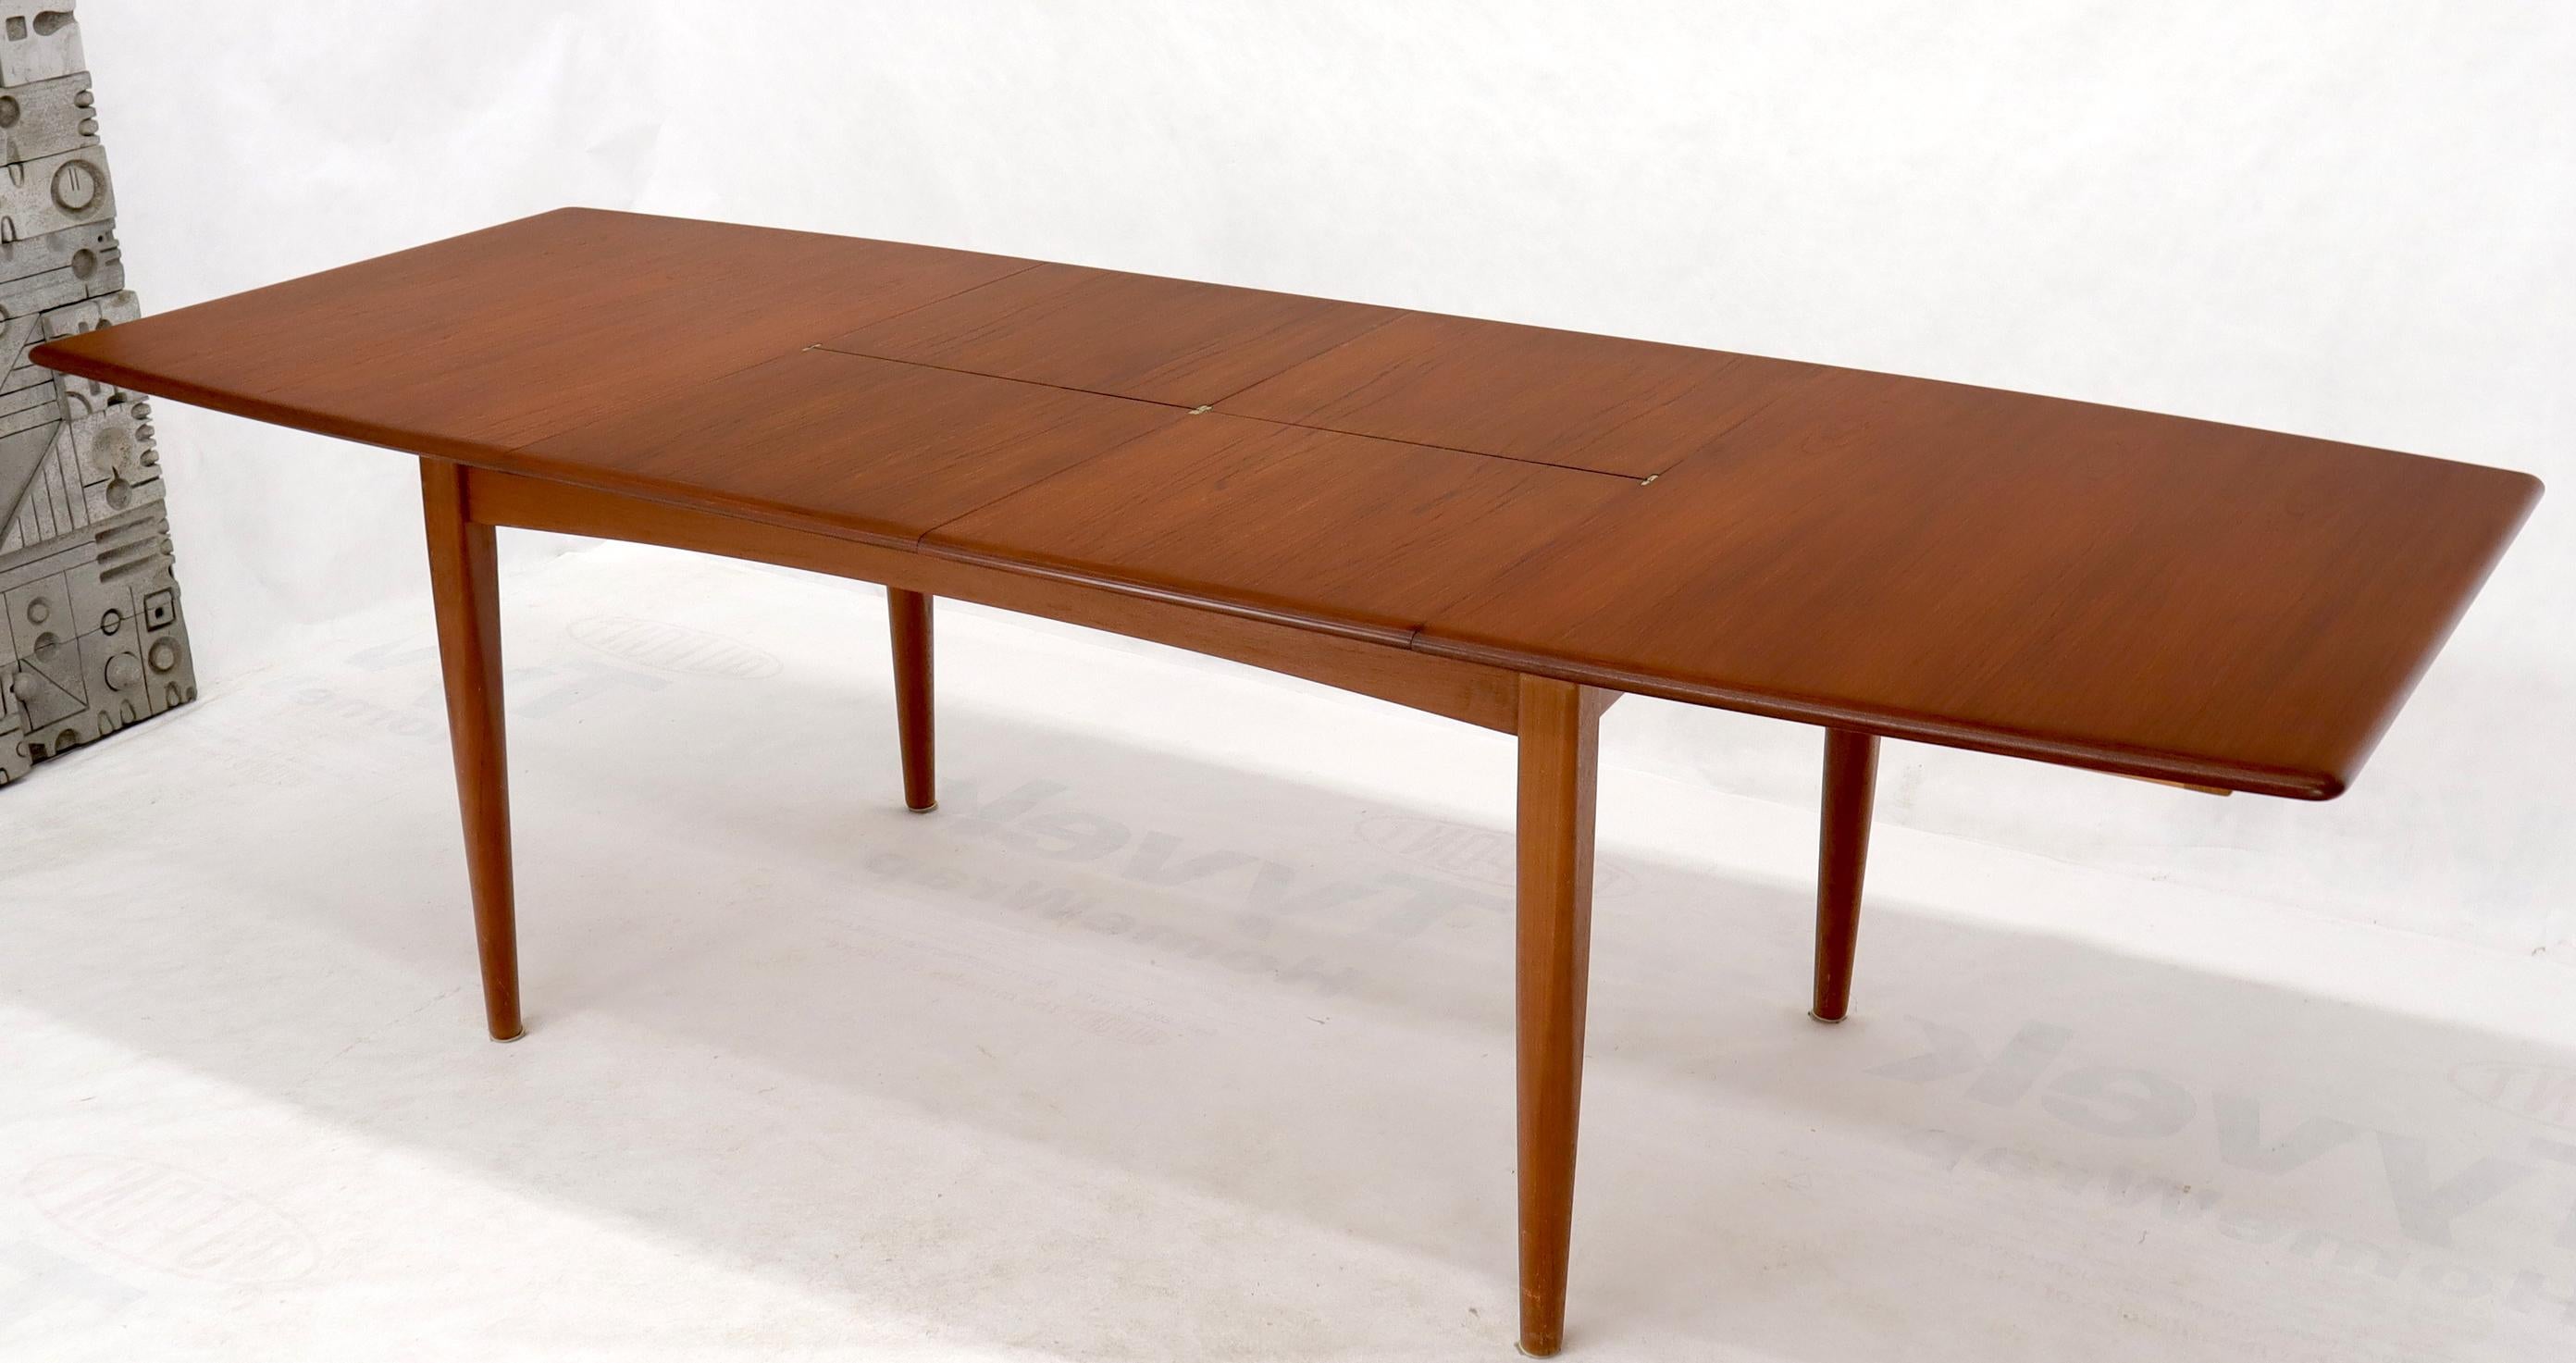 Lacquered Danish Mid-Century Modern Teak Dining Table with Two Pop Up Self Storing Leaves For Sale